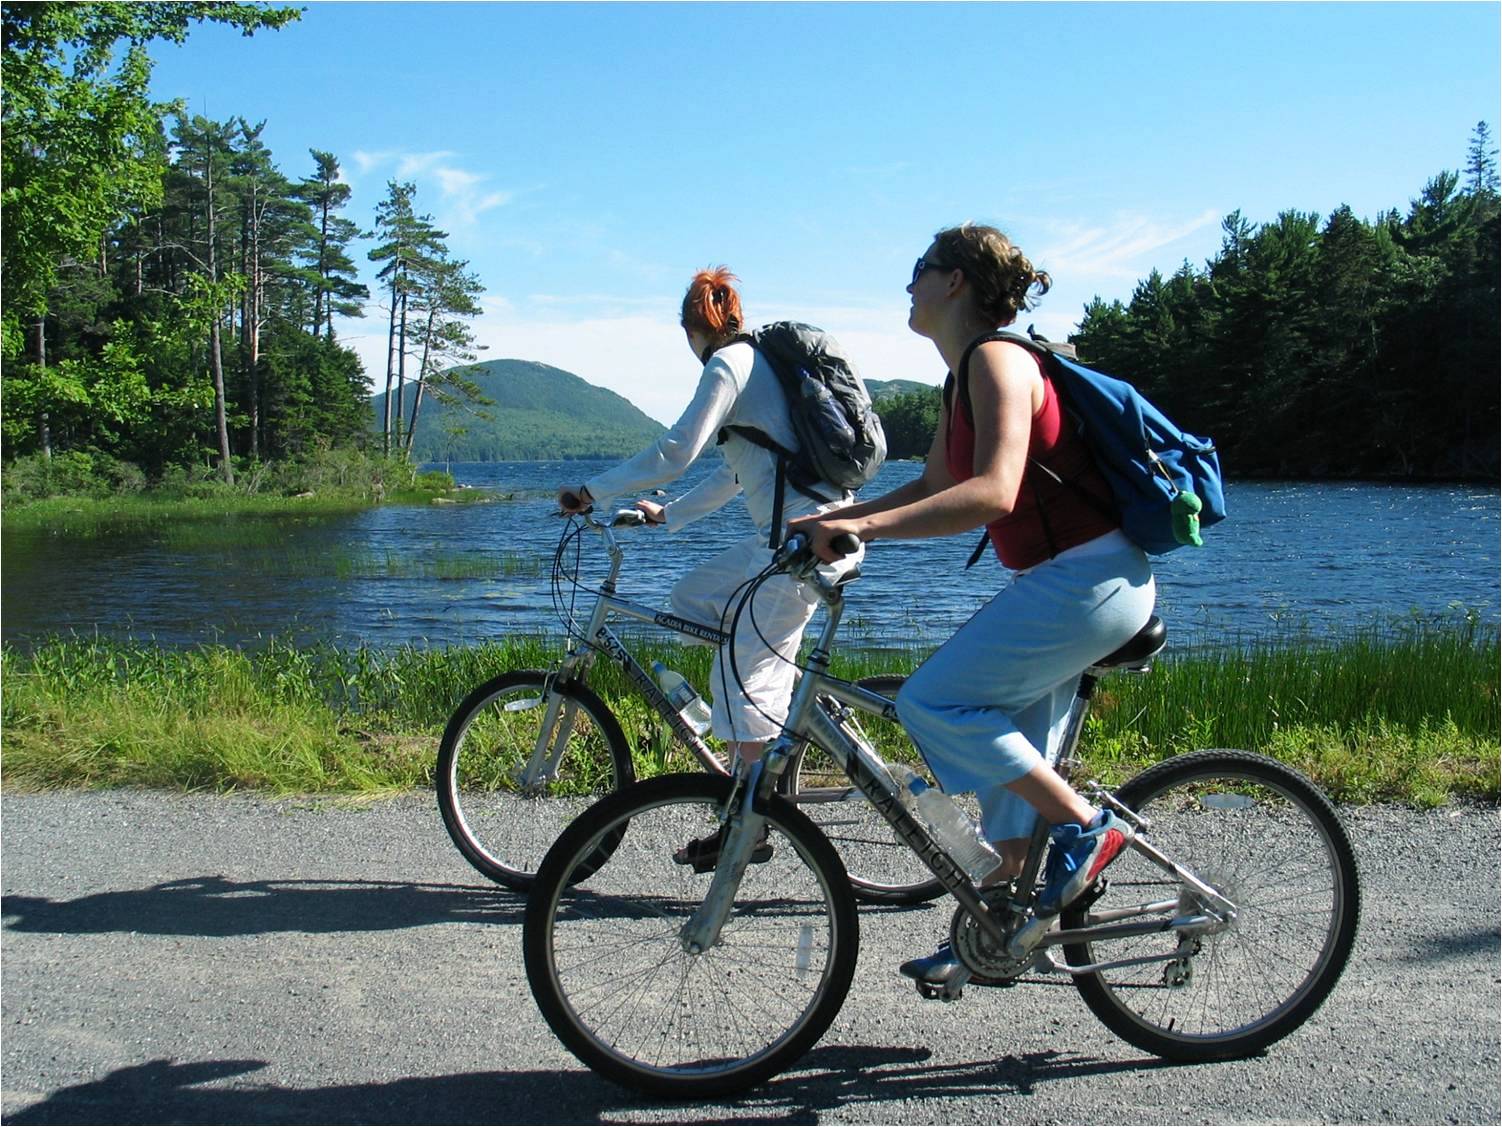 Two female presenting people ride their bikes in Acadia National Park.